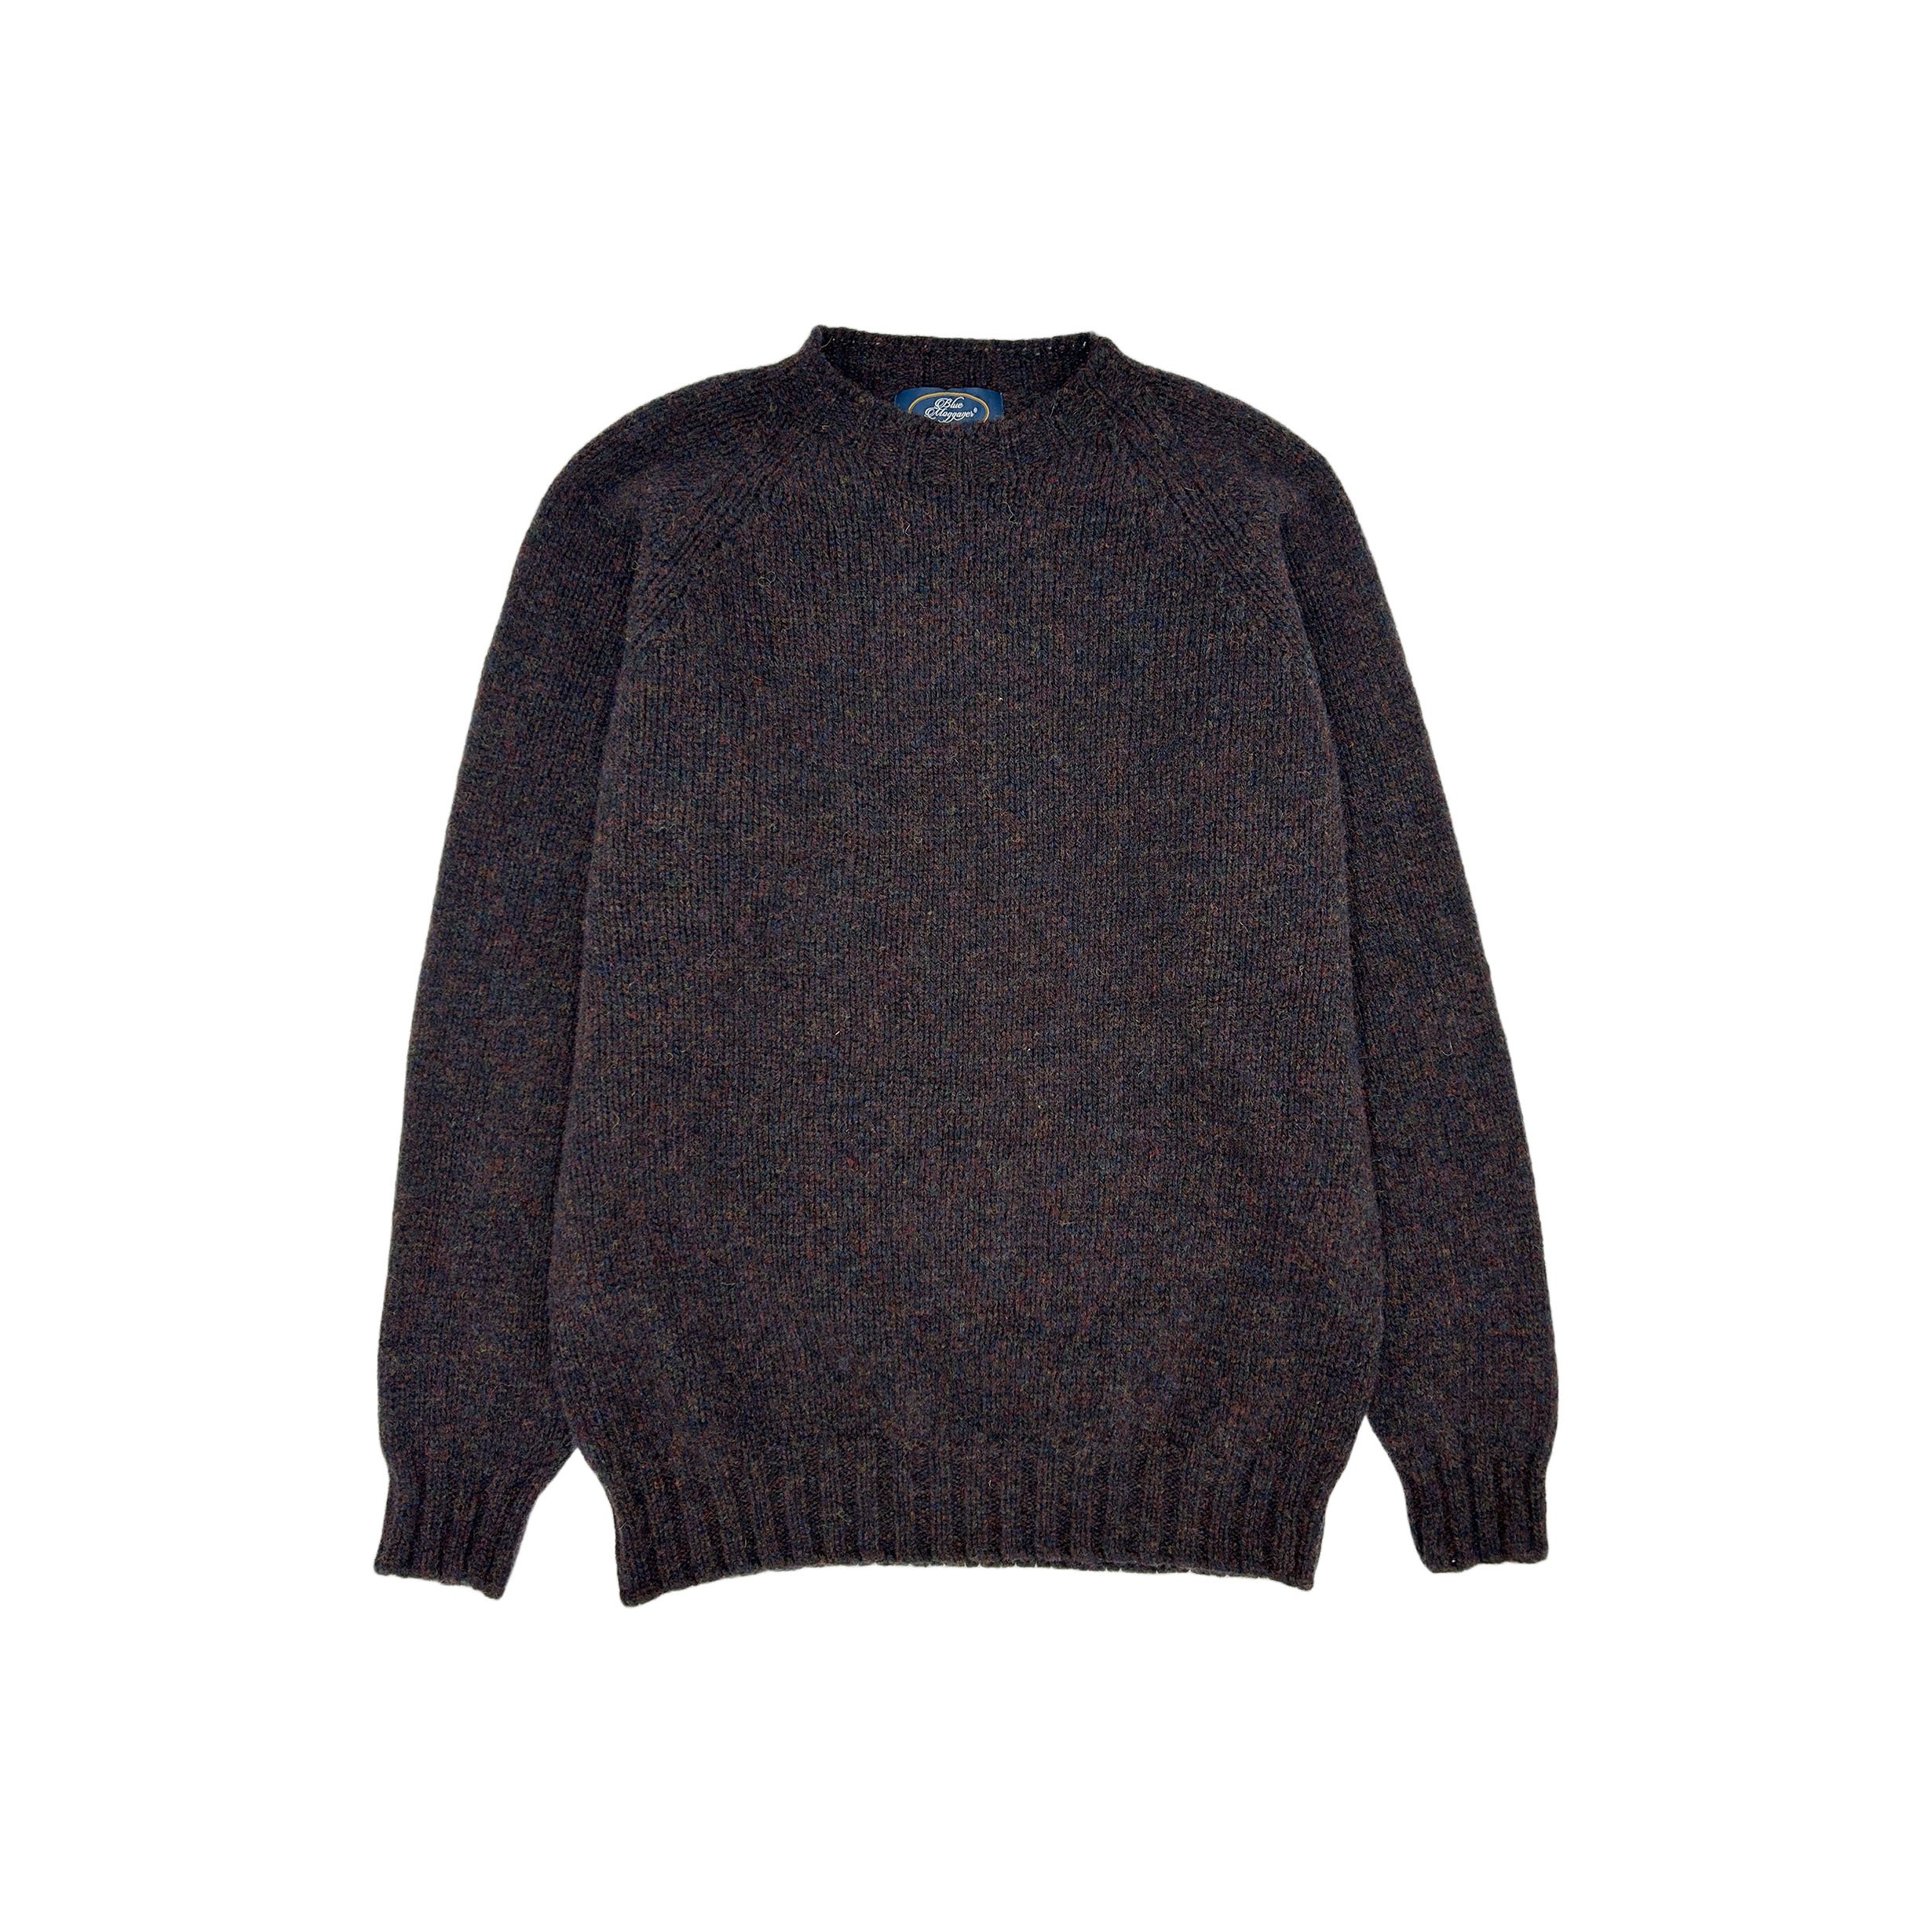 An image of Blue Mogganer North Sea Chunky Seamless Supersoft Shetland - Midnight Black - Sm...